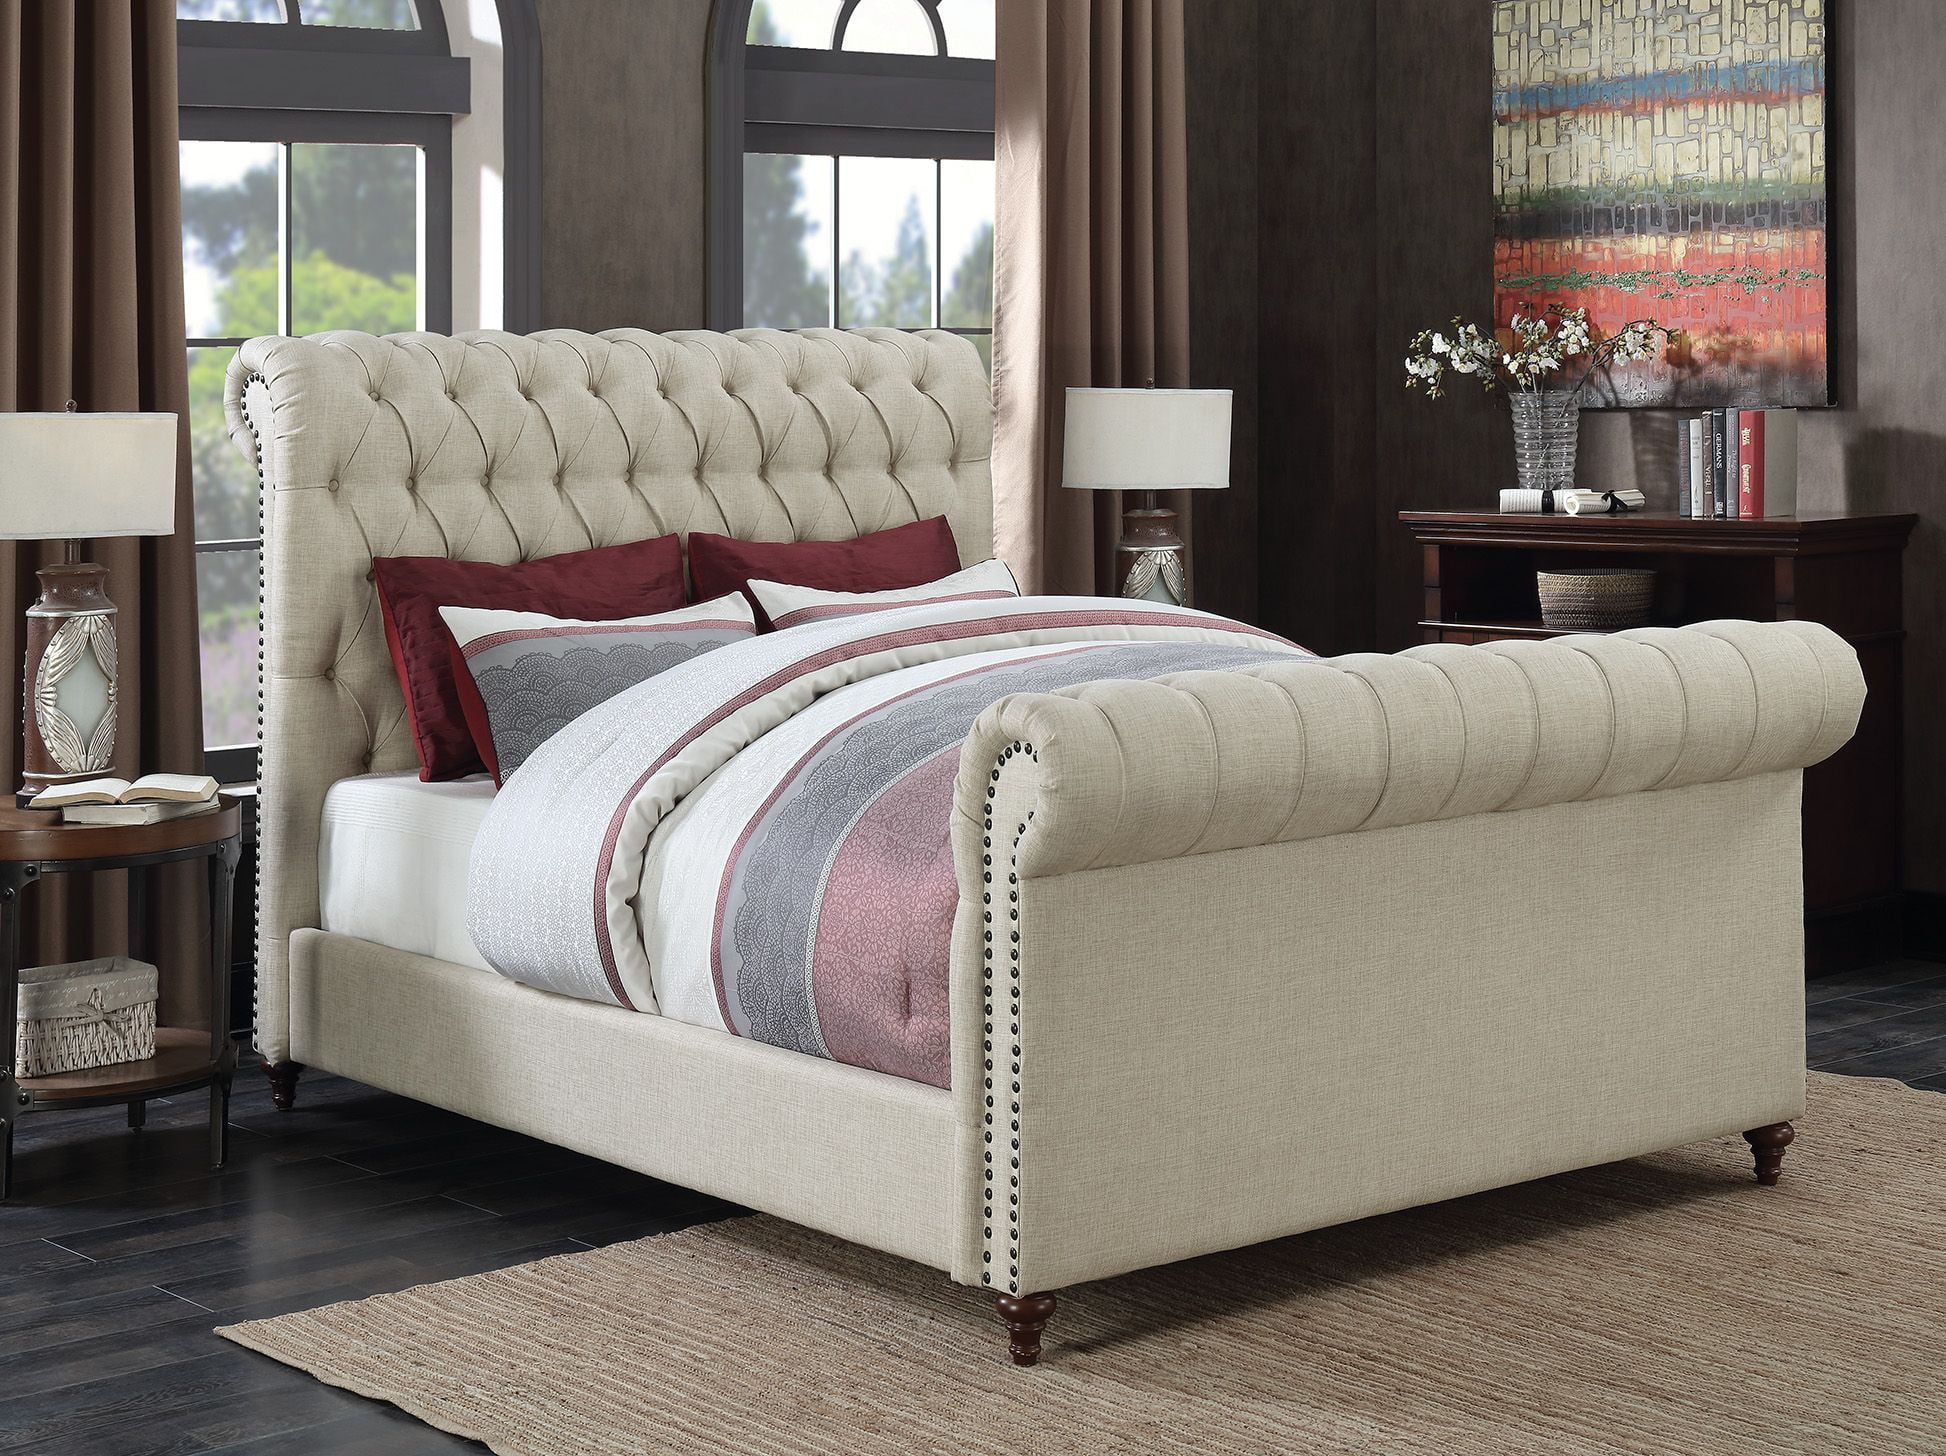 Simple What Is A Sleigh Bed with Best Design